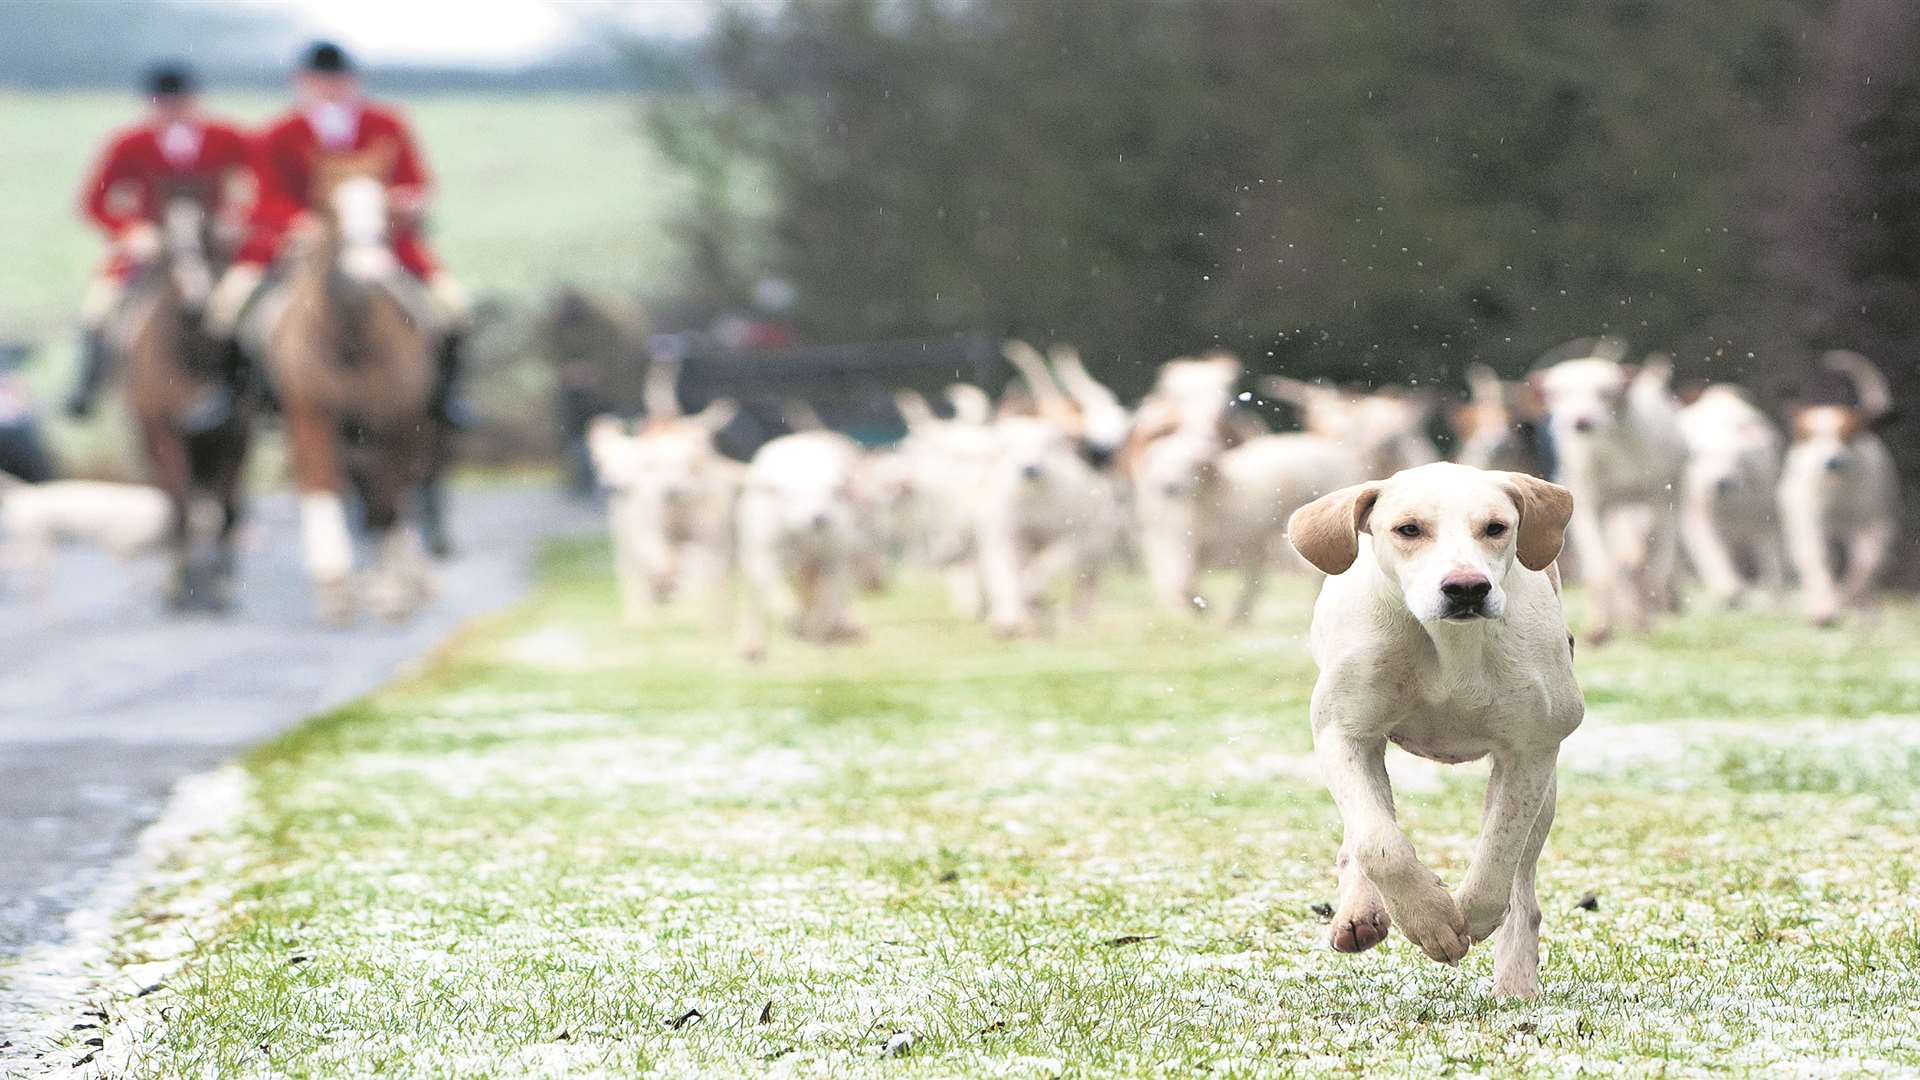 Traditional hunting with dogs has been illegal for 10 years. Stock picture by Nico Morgan